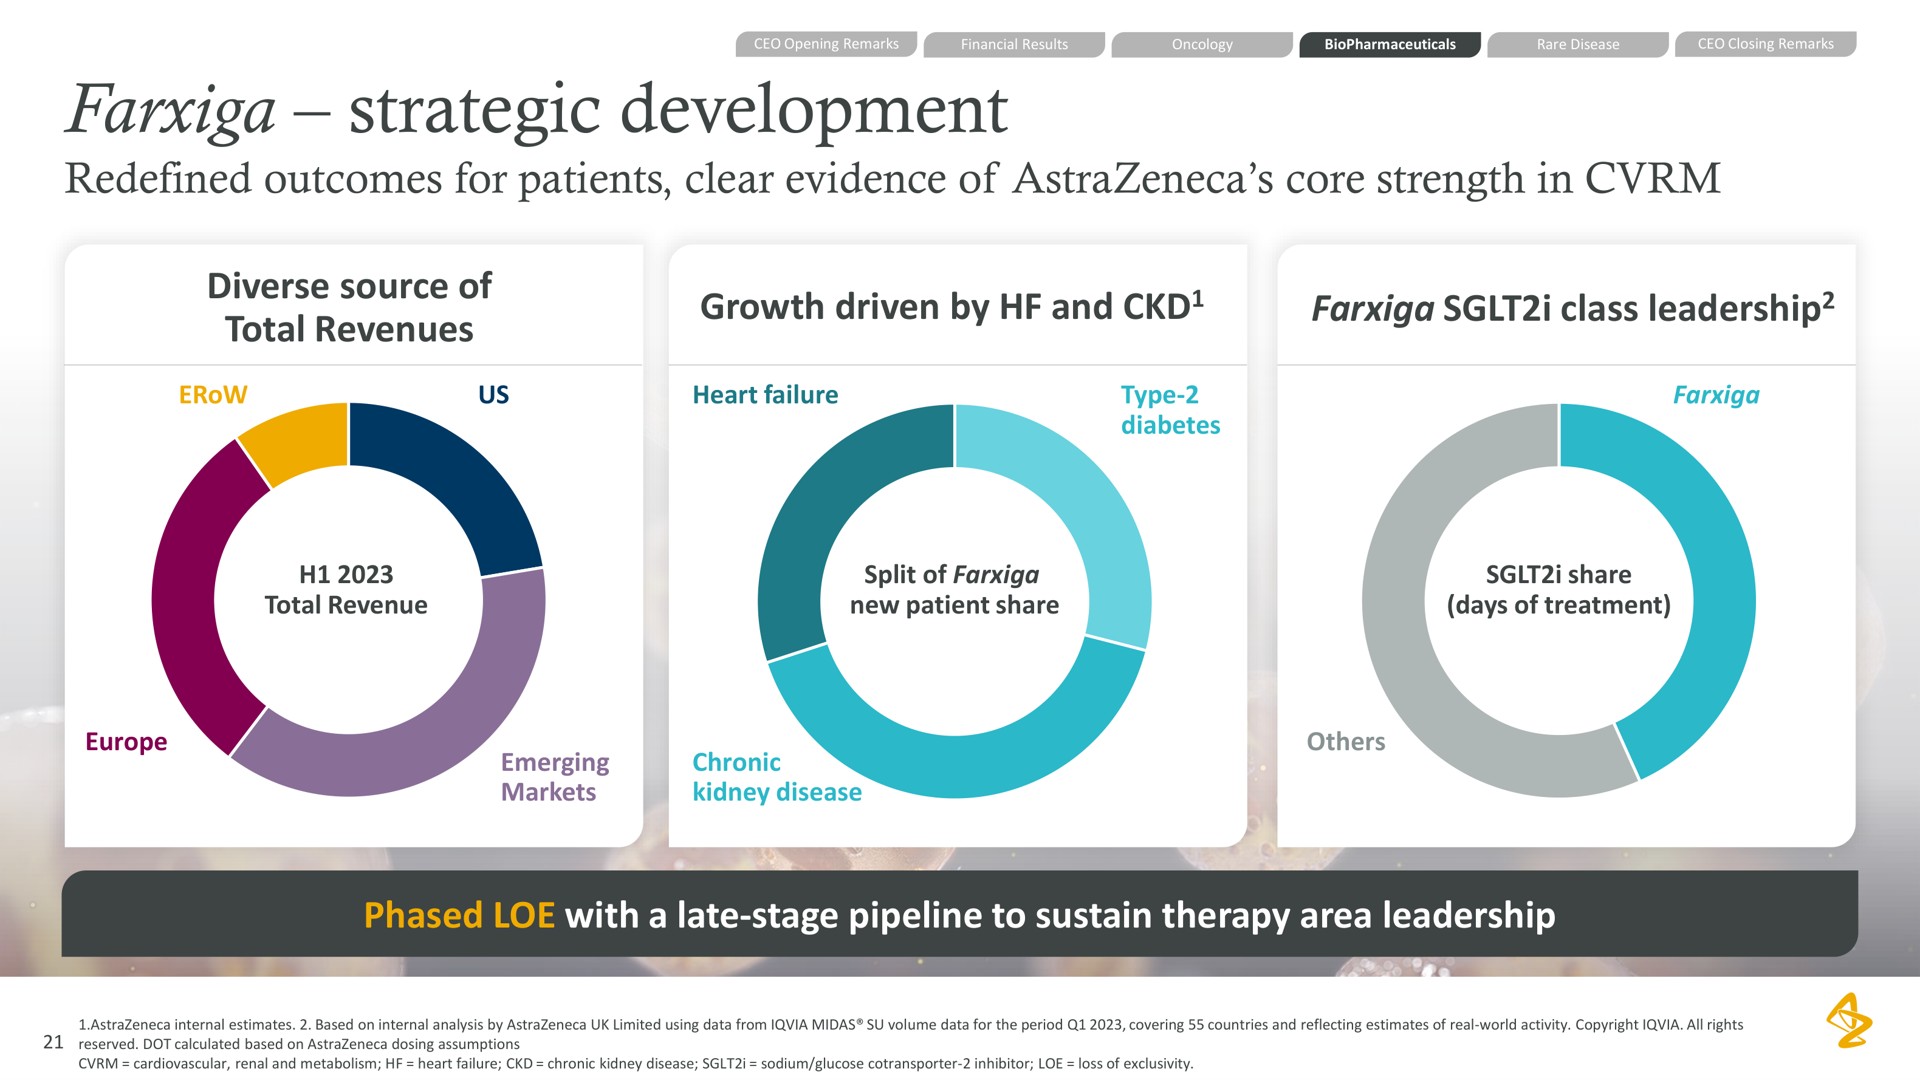 strategic development redefined outcomes for patients clear evidence of core strength in diverse source of total revenues growth driven by and i class leadership phased with a late stage pipeline to sustain therapy area leadership | AstraZeneca